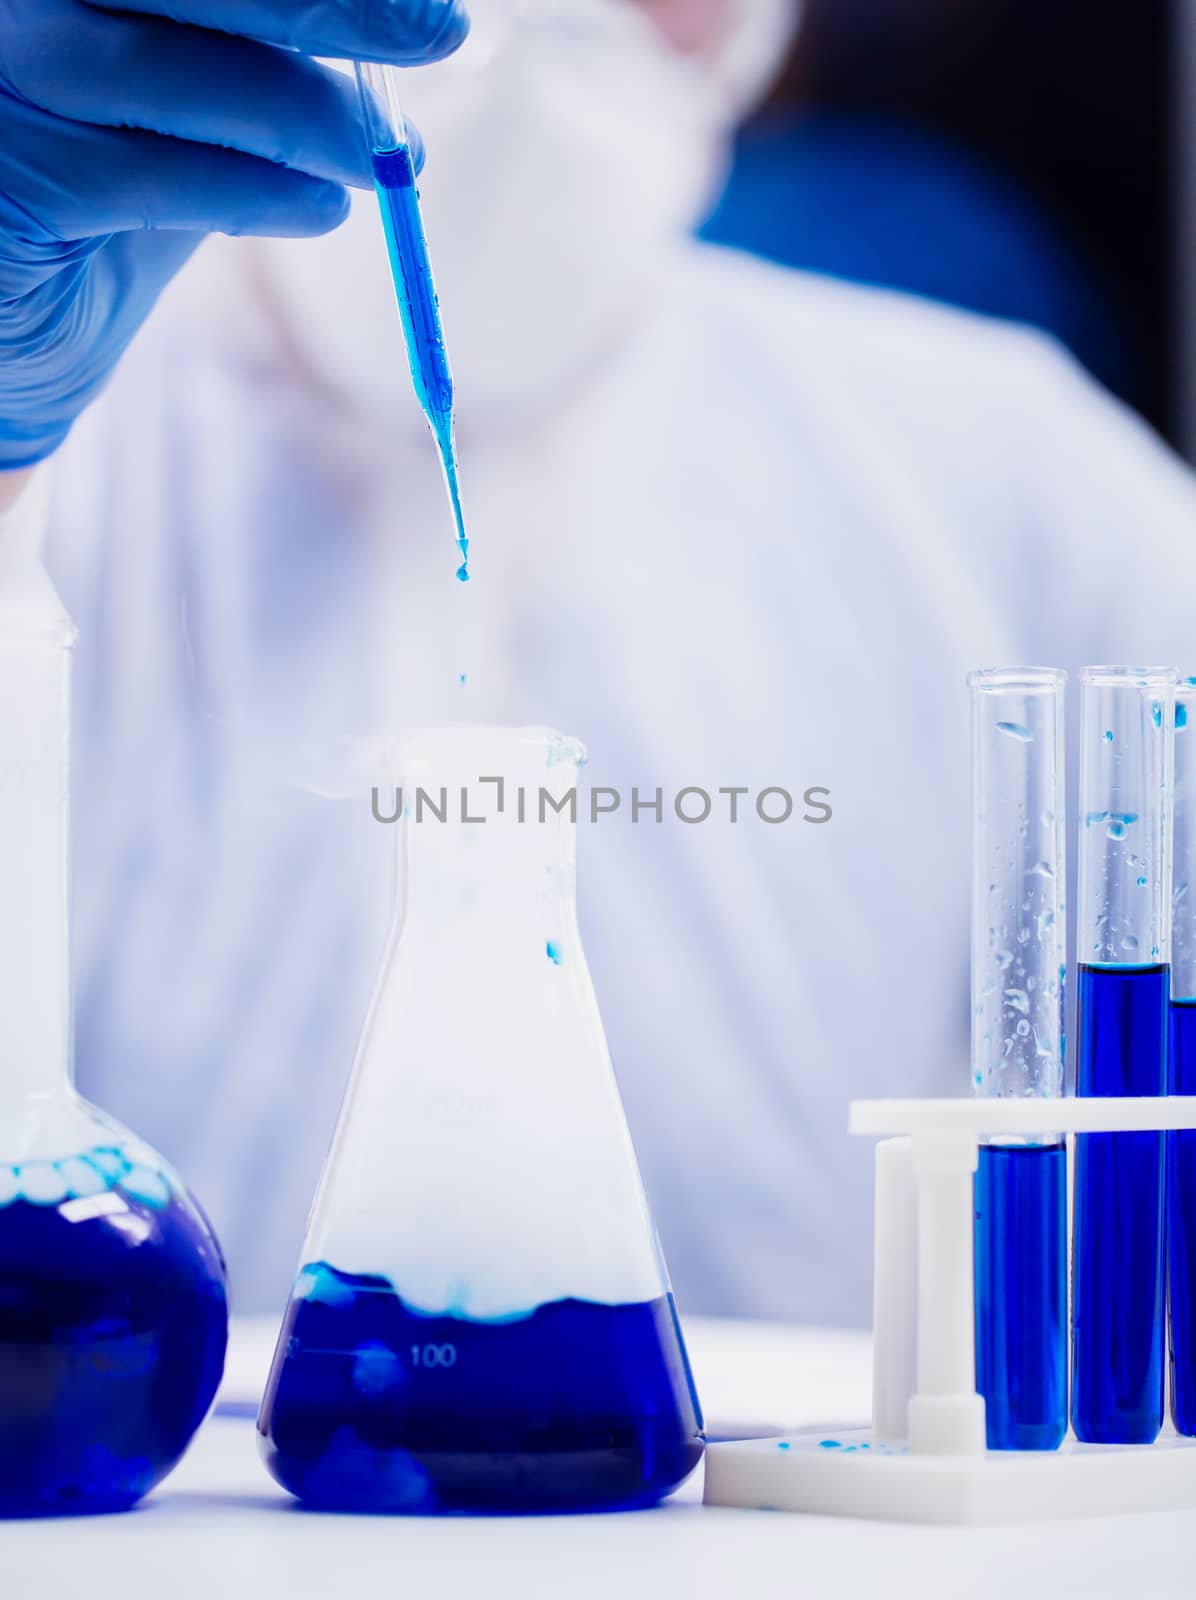 Scientist in a research laboratory taking a sample of blue solution using a pipette.